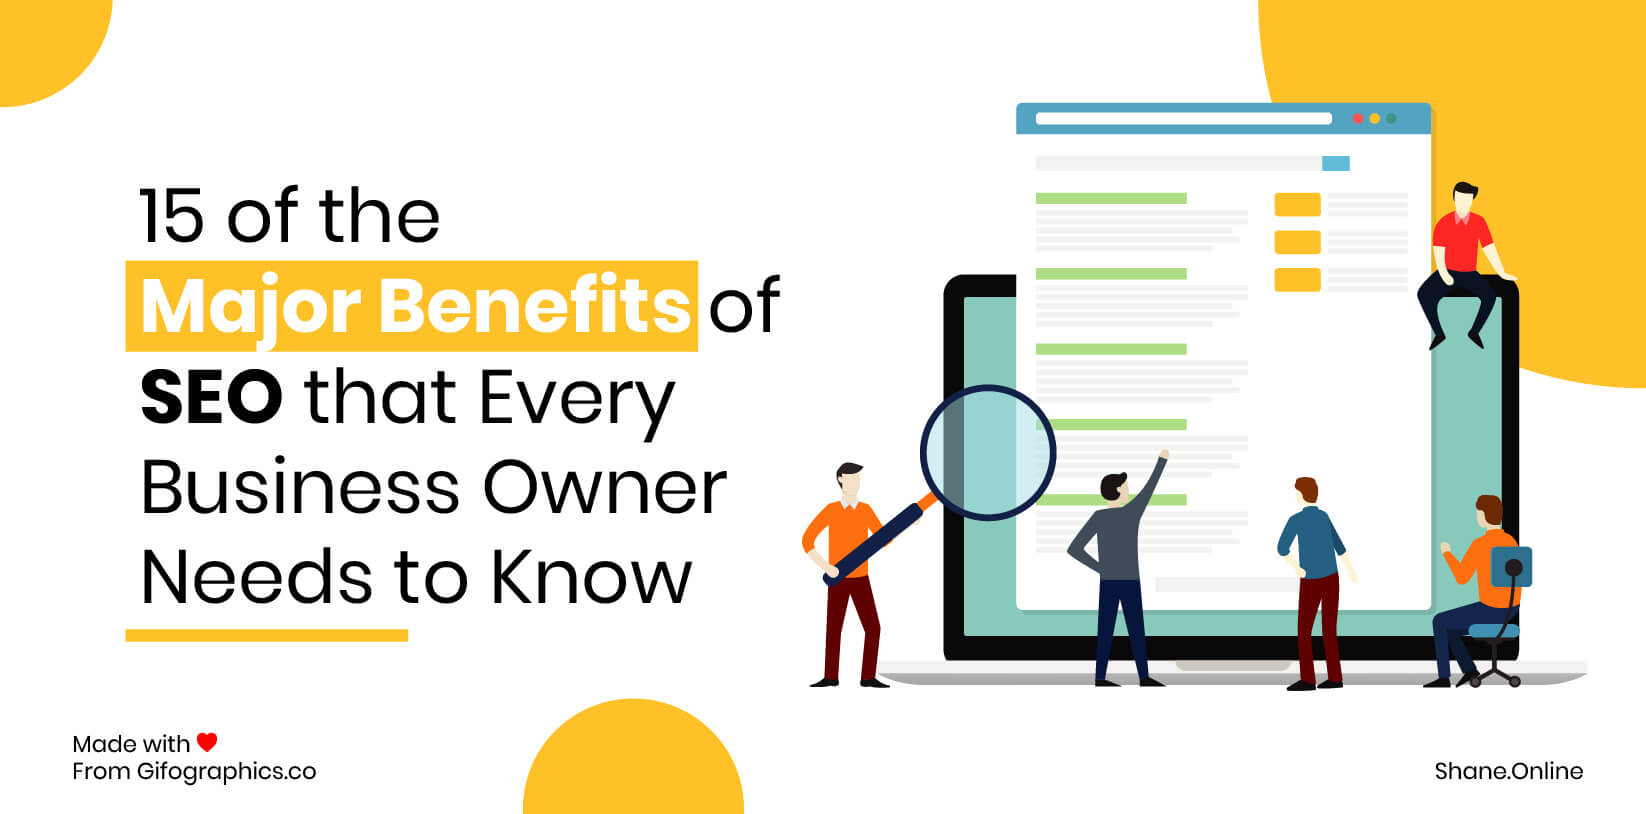 15 of the Major Benefits of SEO that Every Business Owner Needs to Know0